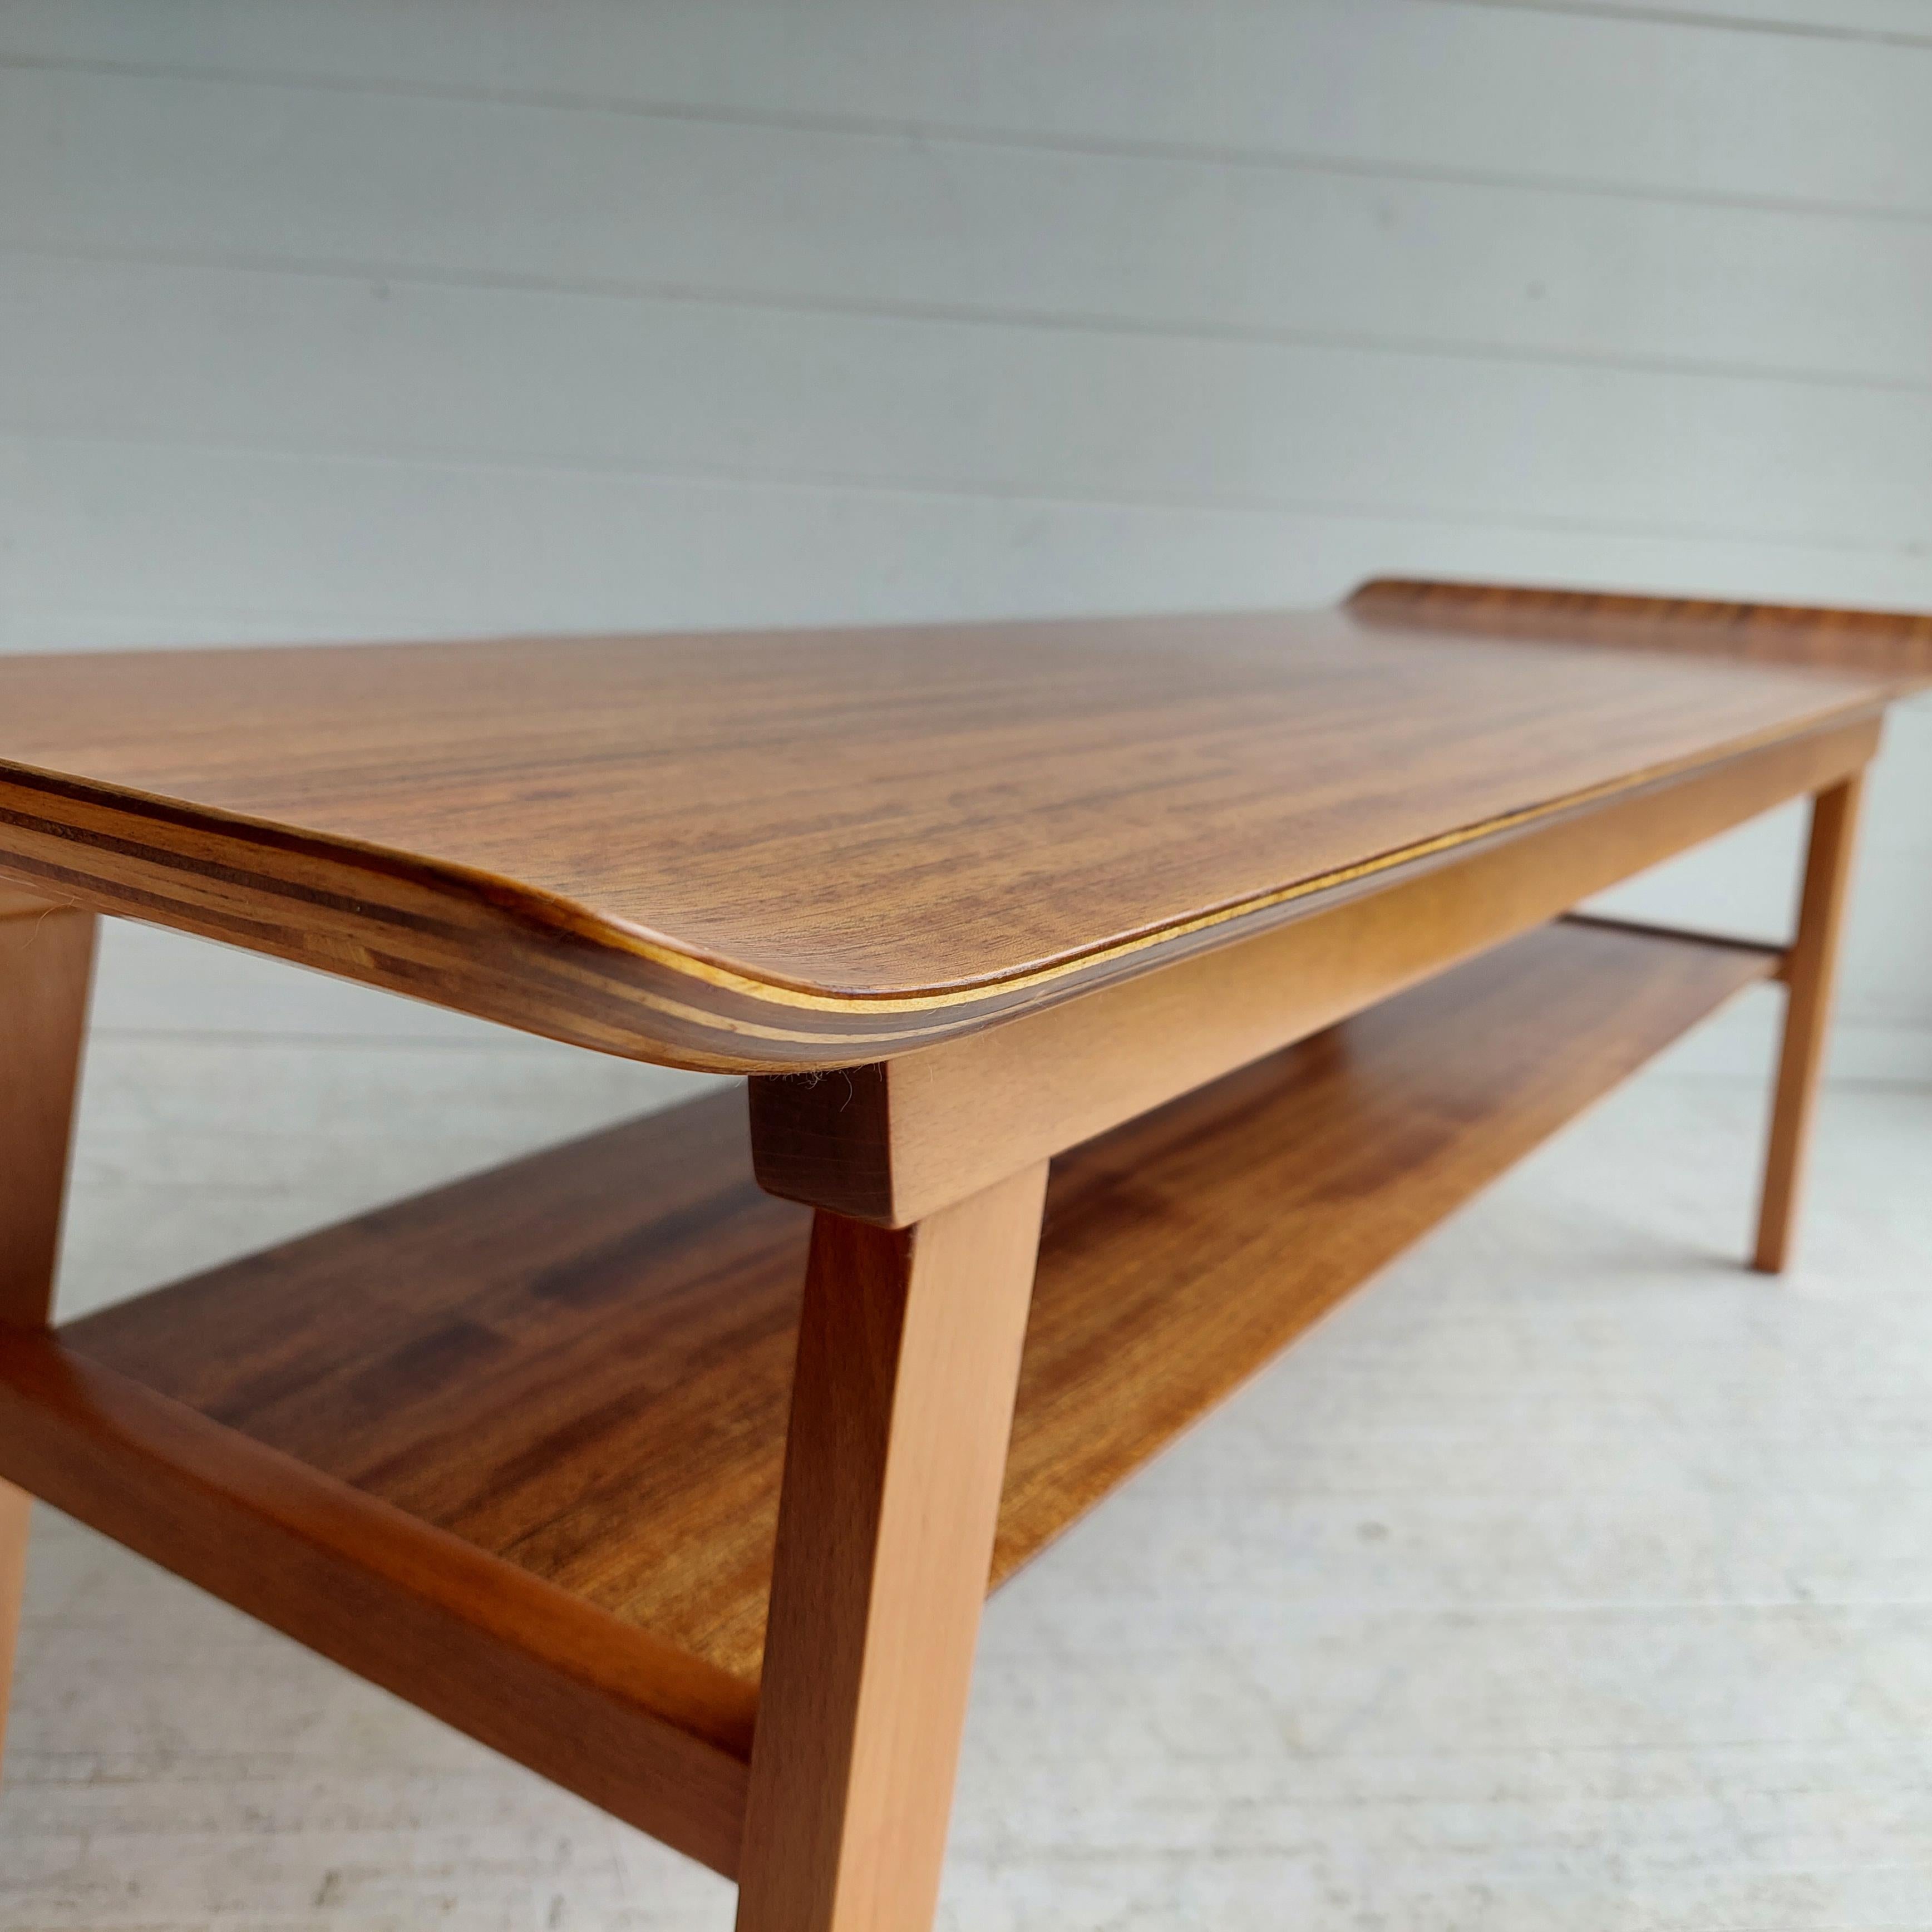 Scandinavian Modern Mid Century Walnut 2 tier coffee table Ewart Myer for Horatio Myer and Co, 1960s For Sale